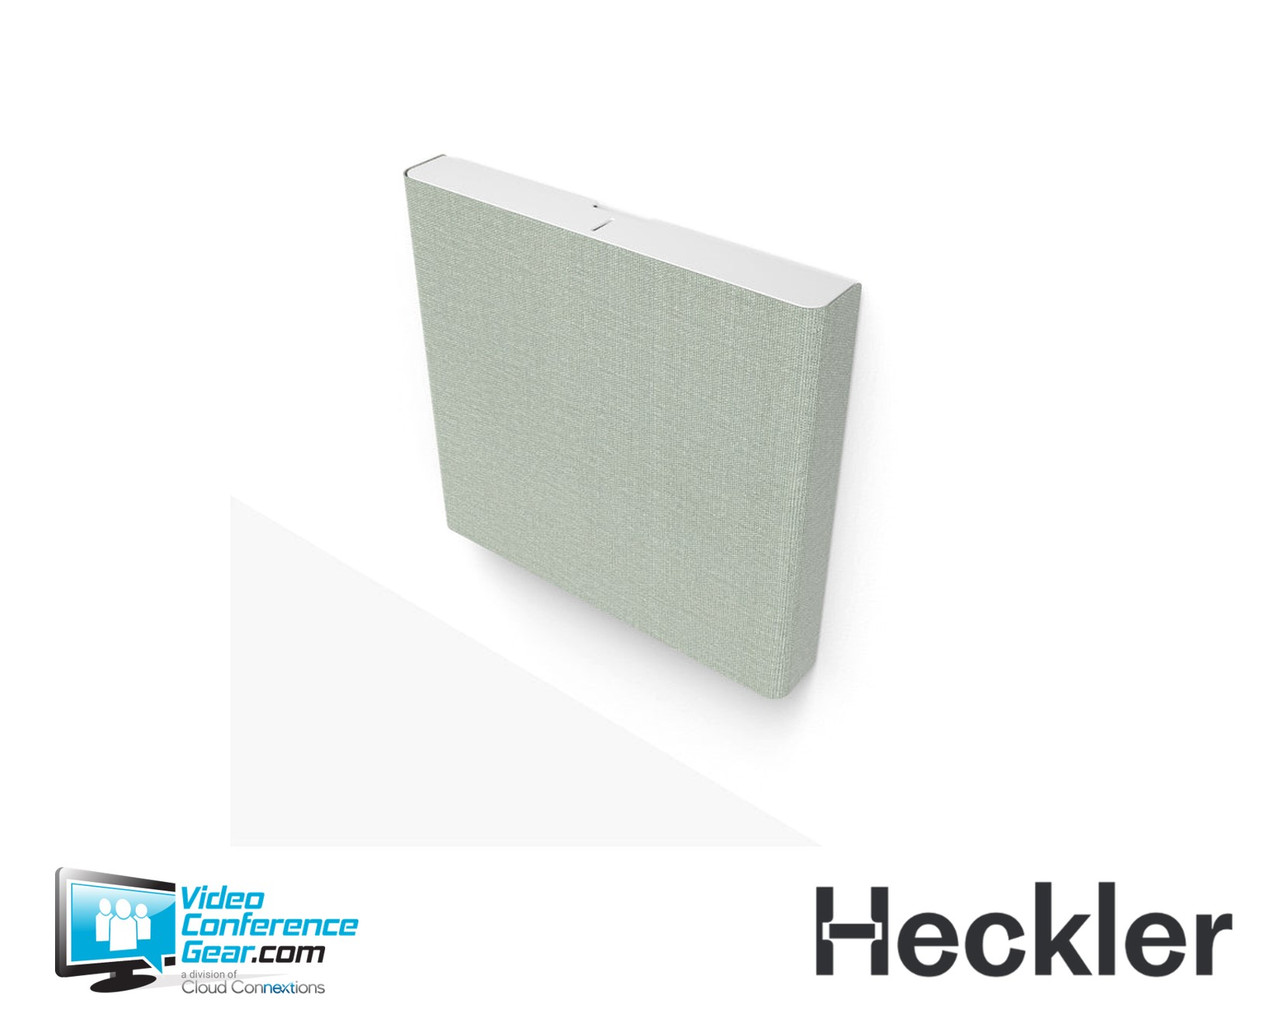 Heckler H892-GN AV Credenza Mini for Video Conferencing Meeting Rooms - Green